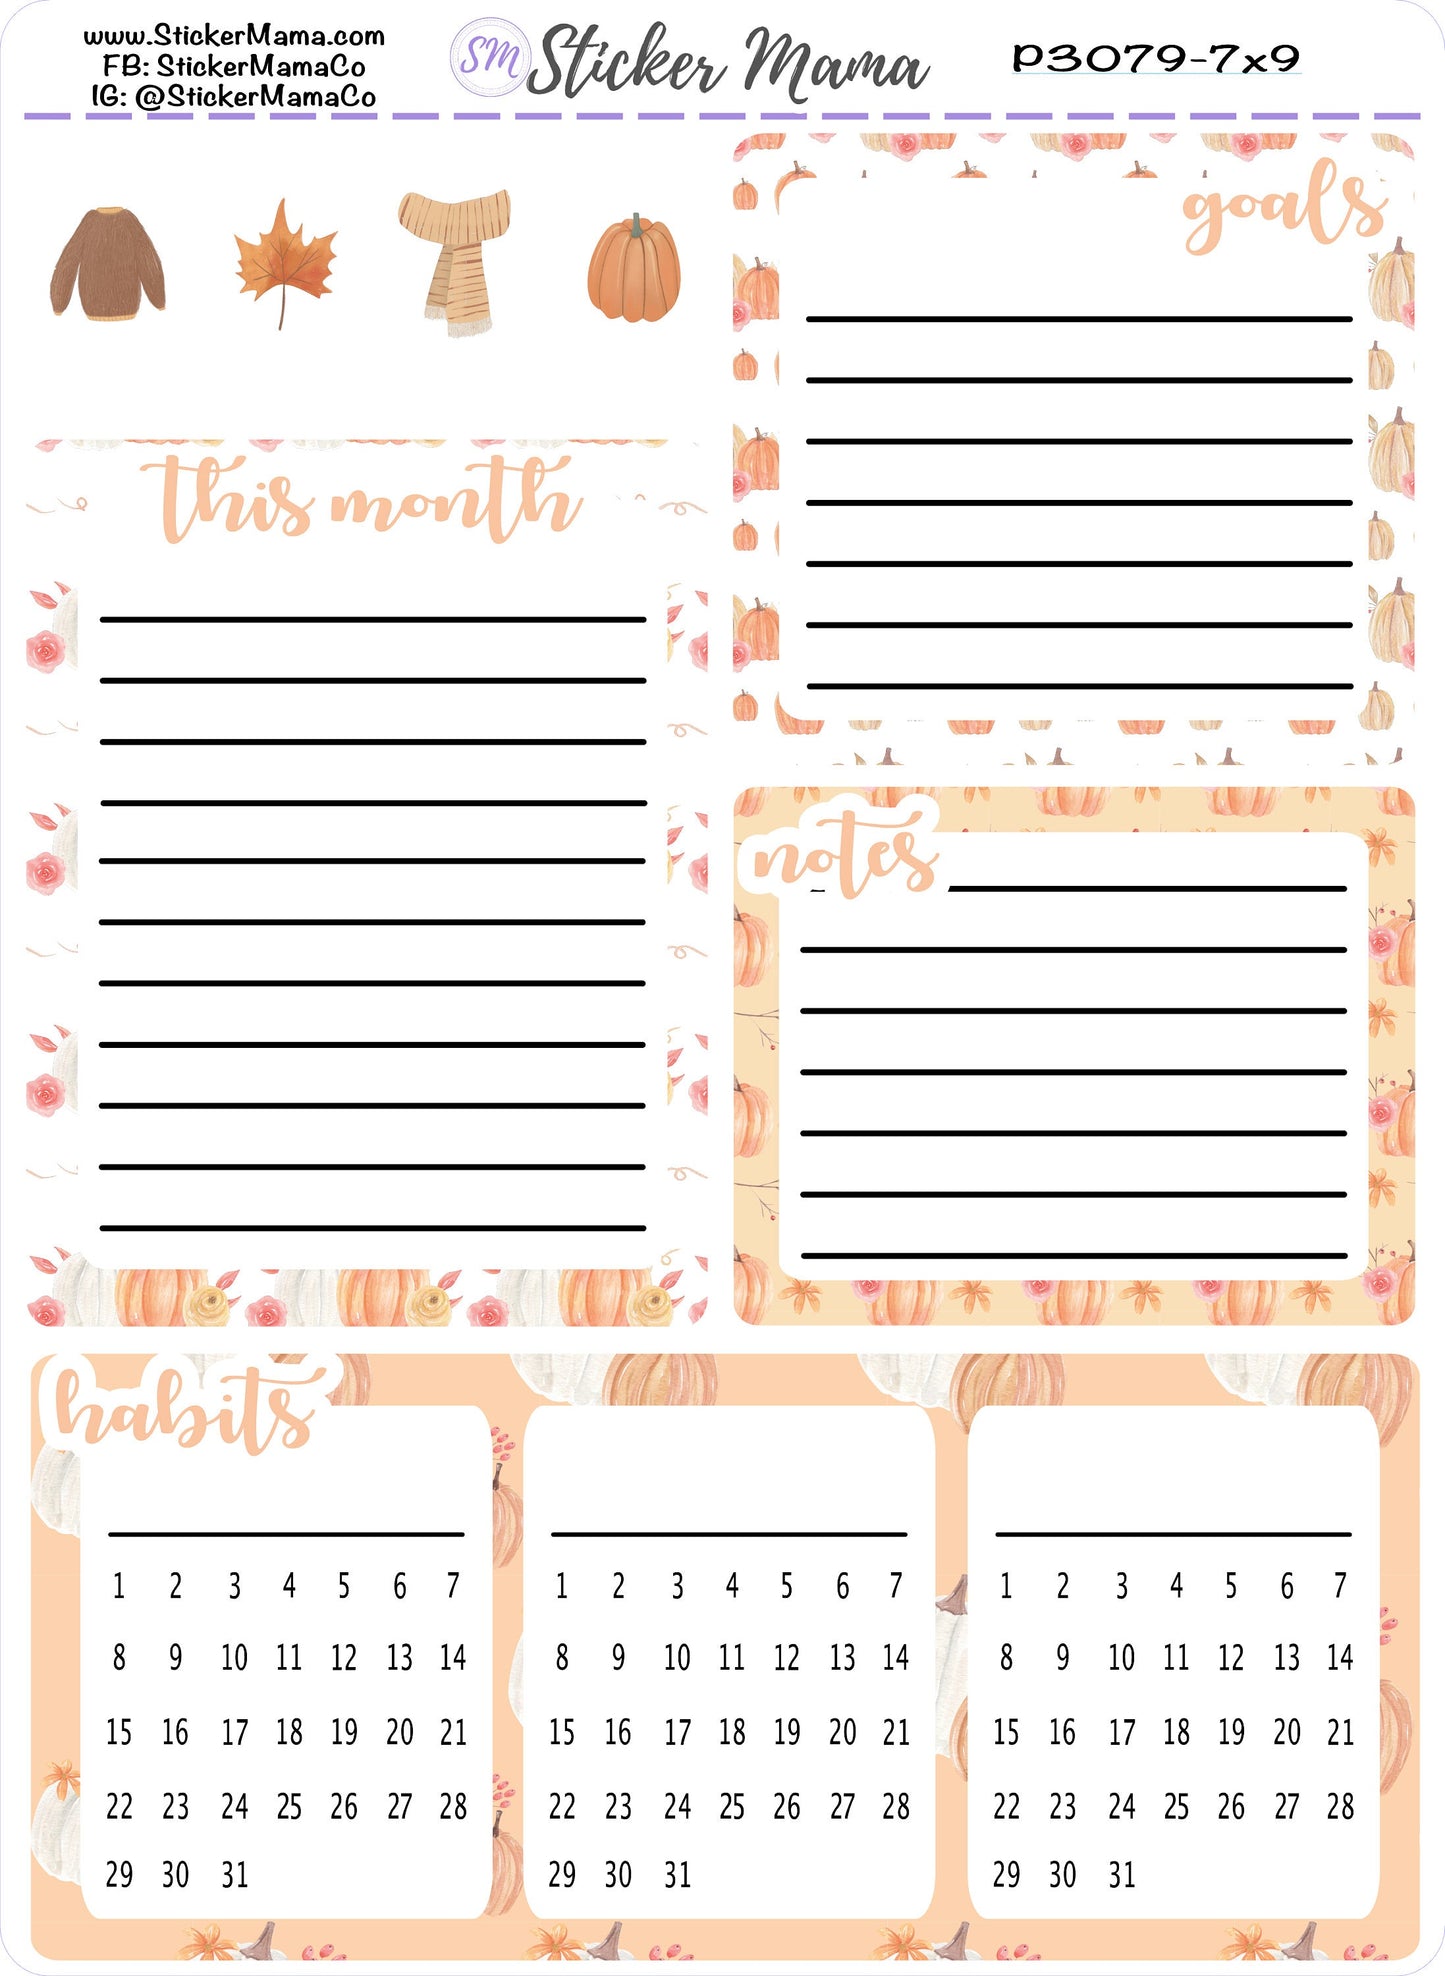 3079 - Pumpkin October Stickers || A5 or 7x9 PRODUCTIVITY DASHBOARD Sticker || eclp notes page stickers || productivity planner